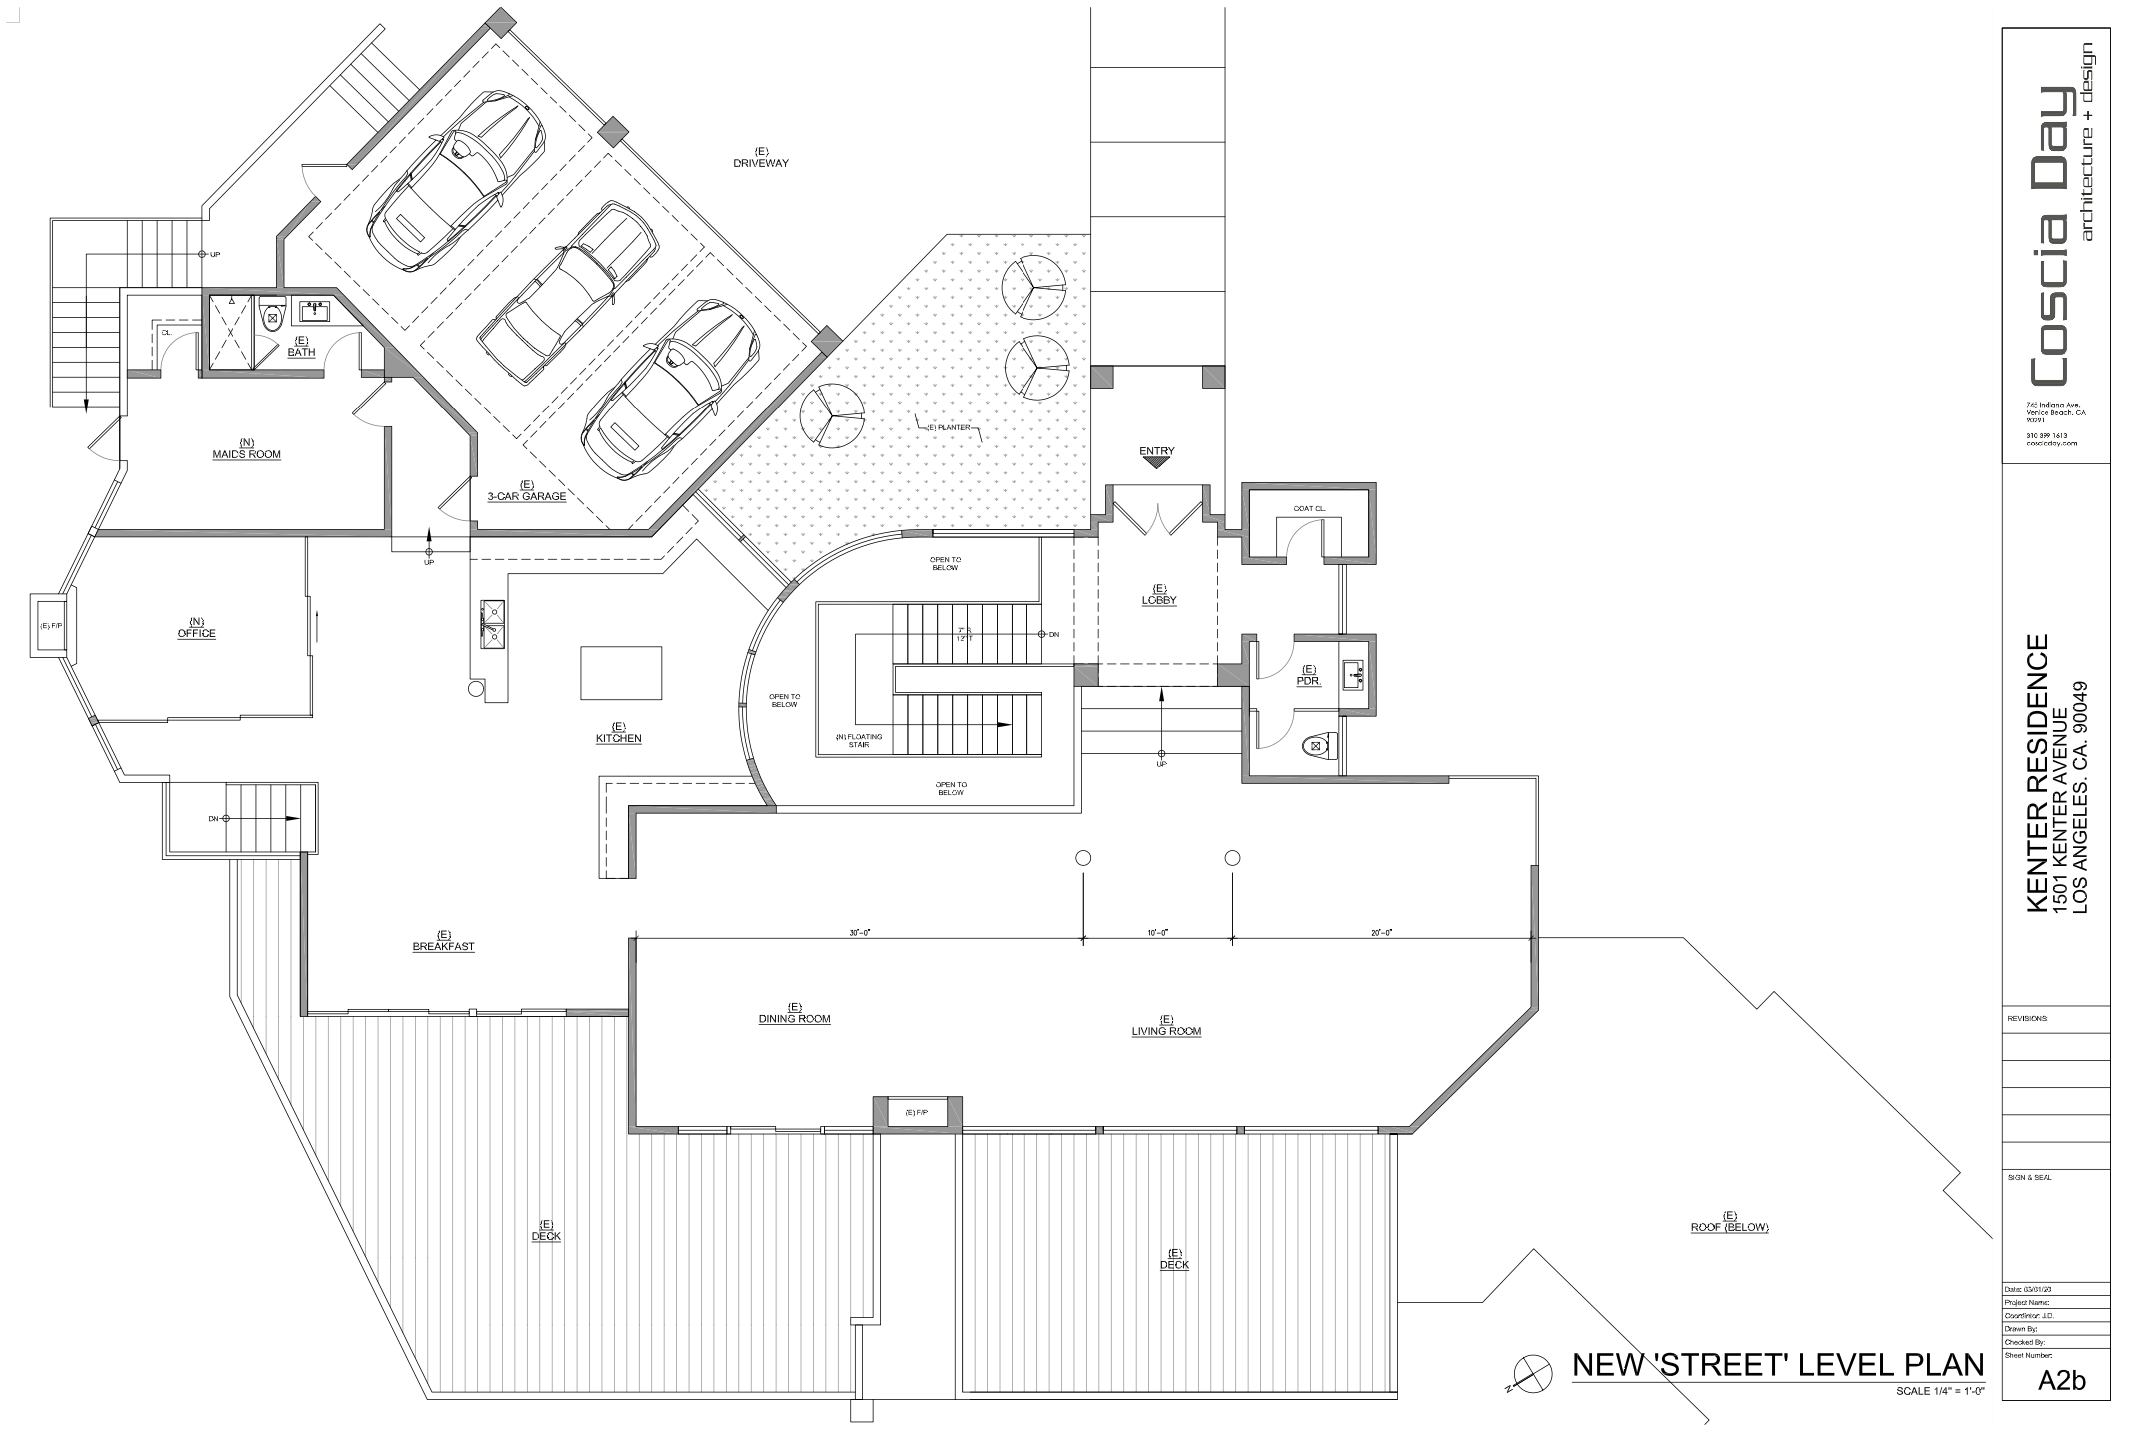   Note: Floor plans should be considered approximate and not an exact replica.  